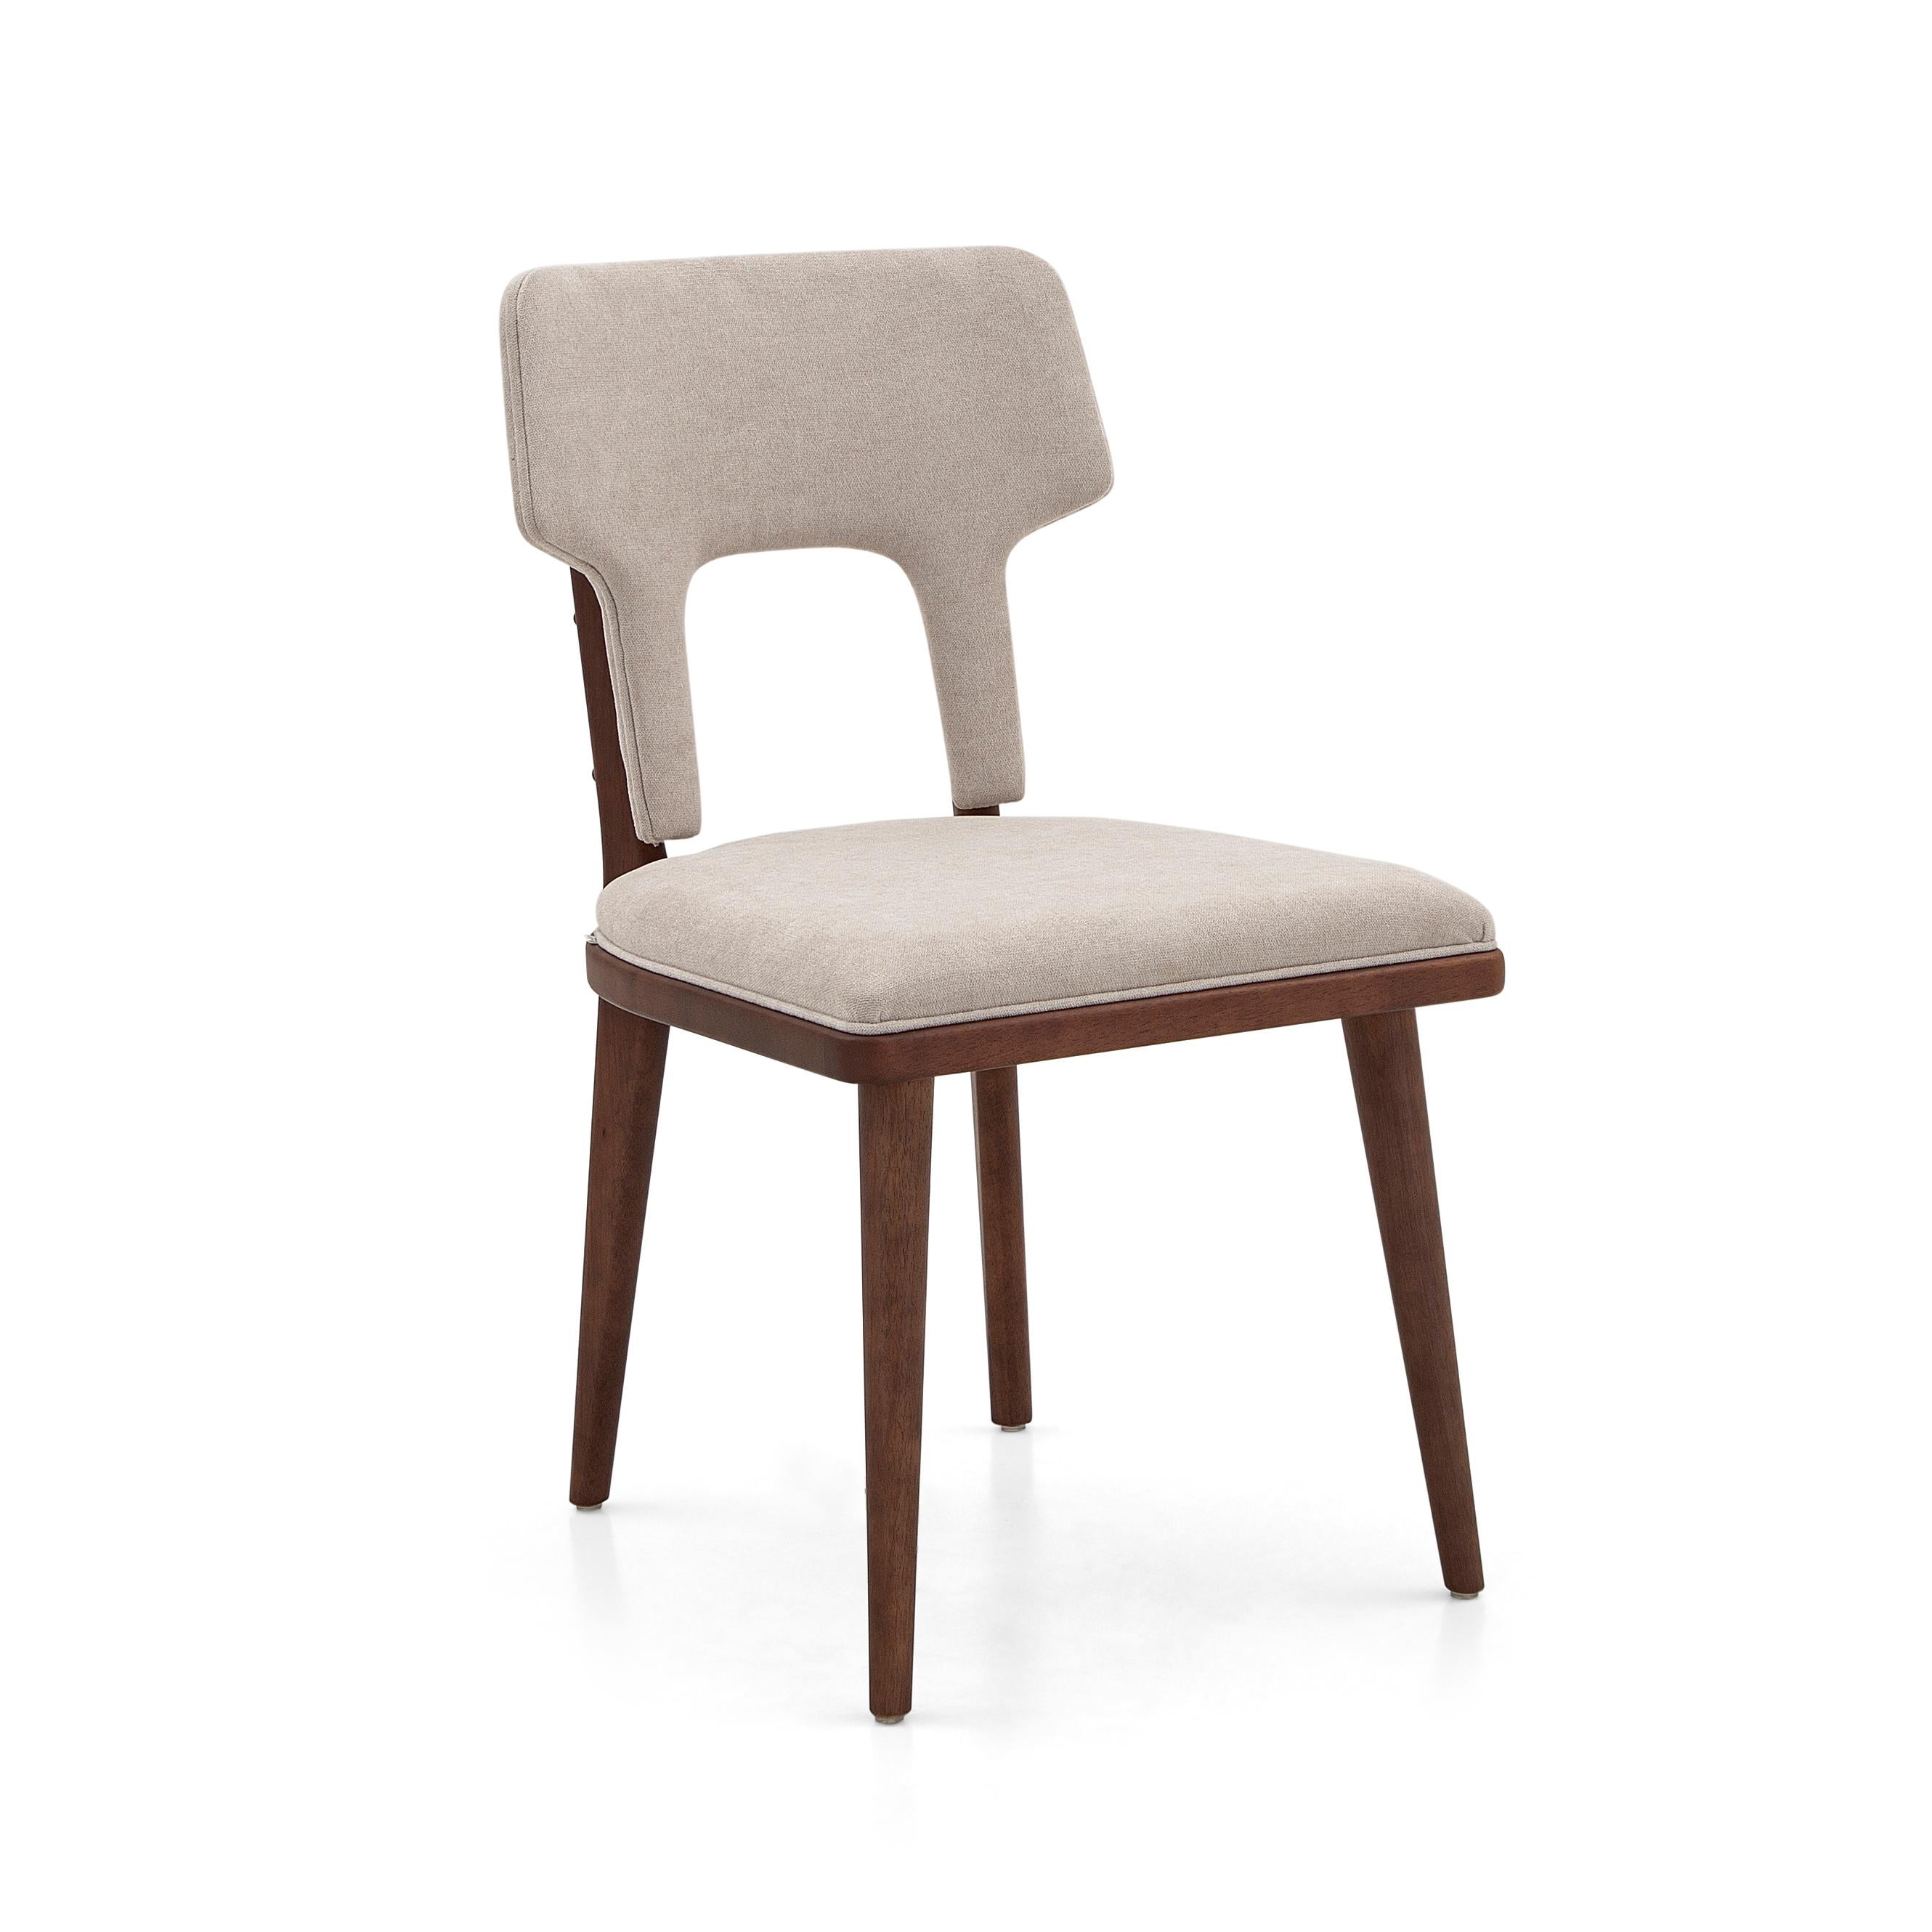 Contemporary Fork Dining Chair in Light Beige Fabric and Walnut Wood Finish, Set of 2 For Sale